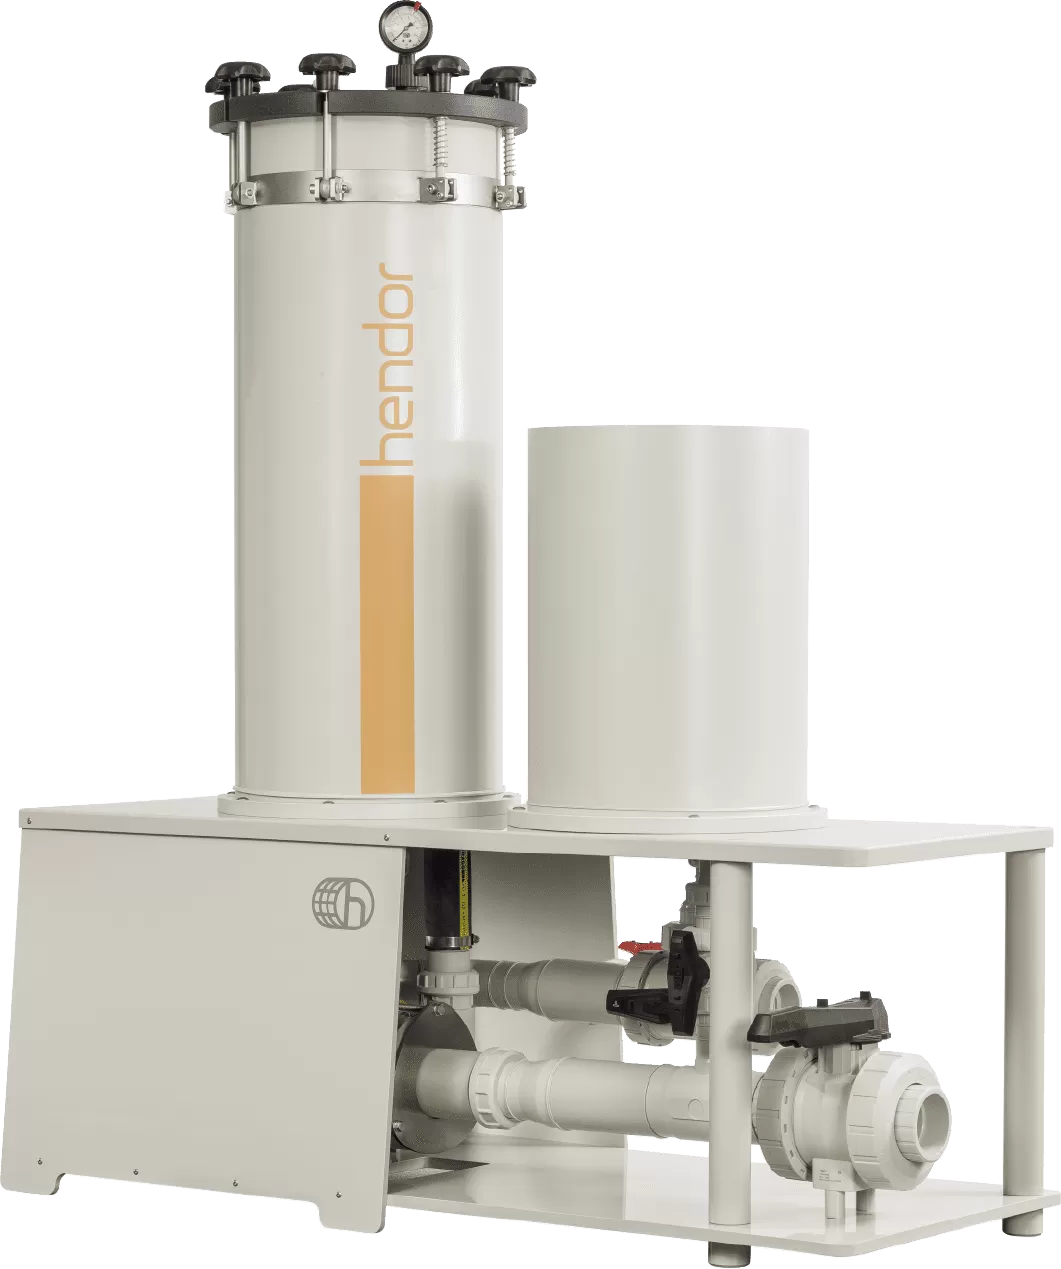 Filtration system series 15 from Hendor 